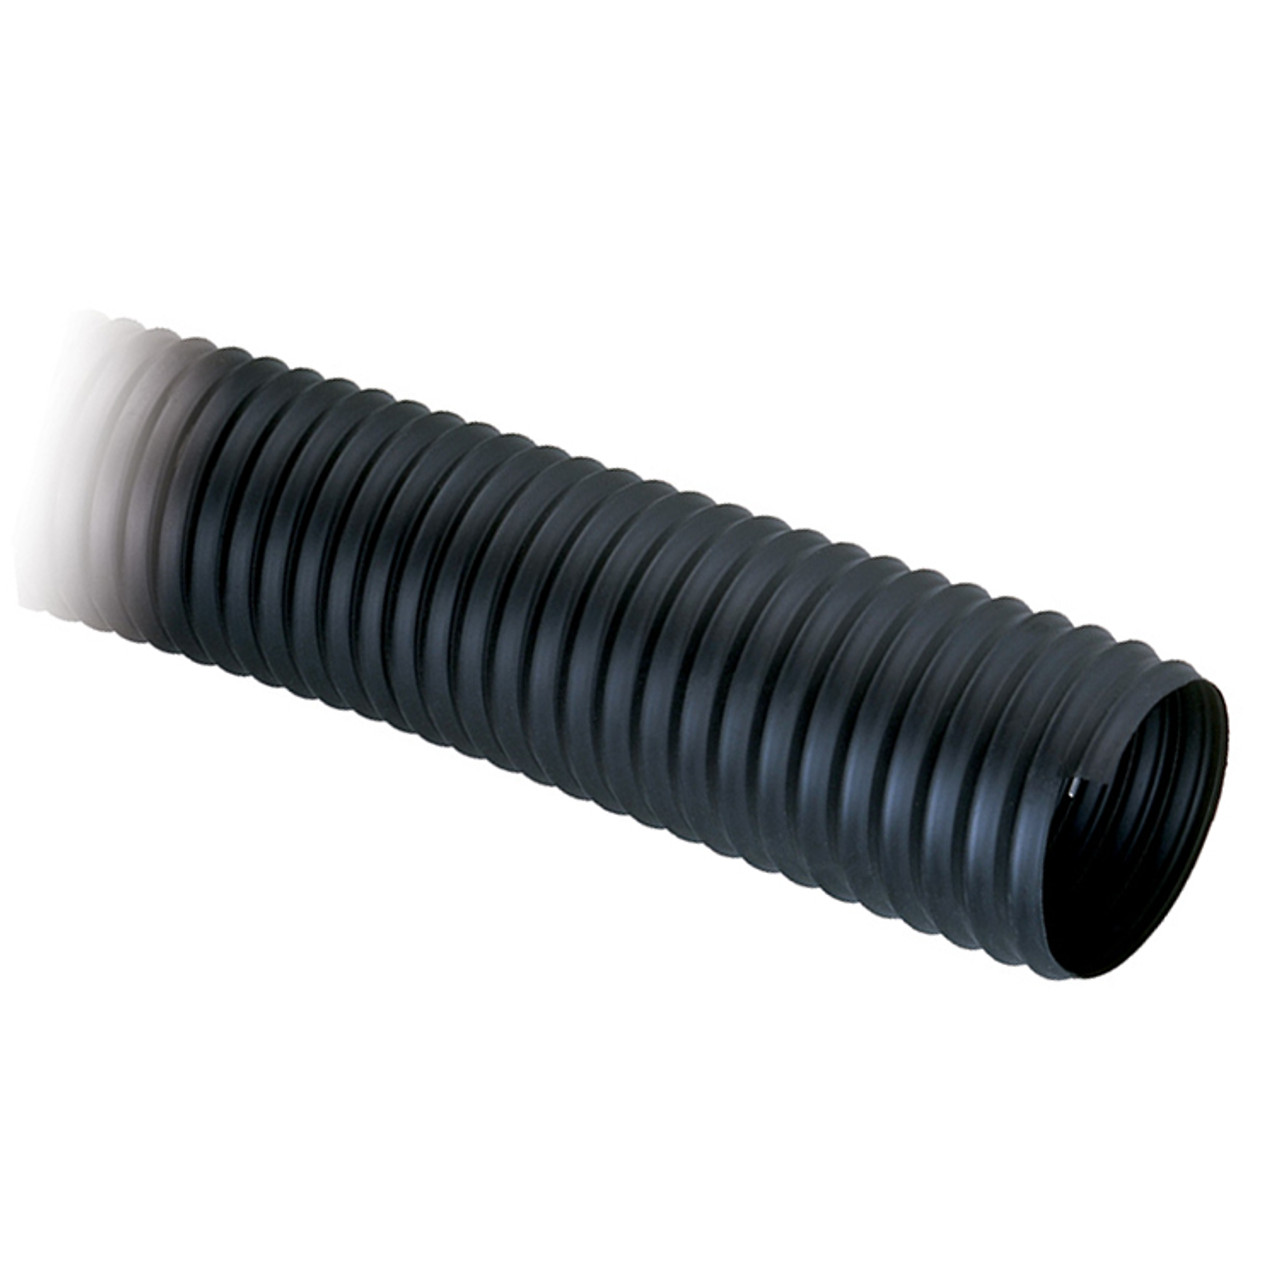 6" Thermoplastic Rubber Ducting Hose   TPR-600